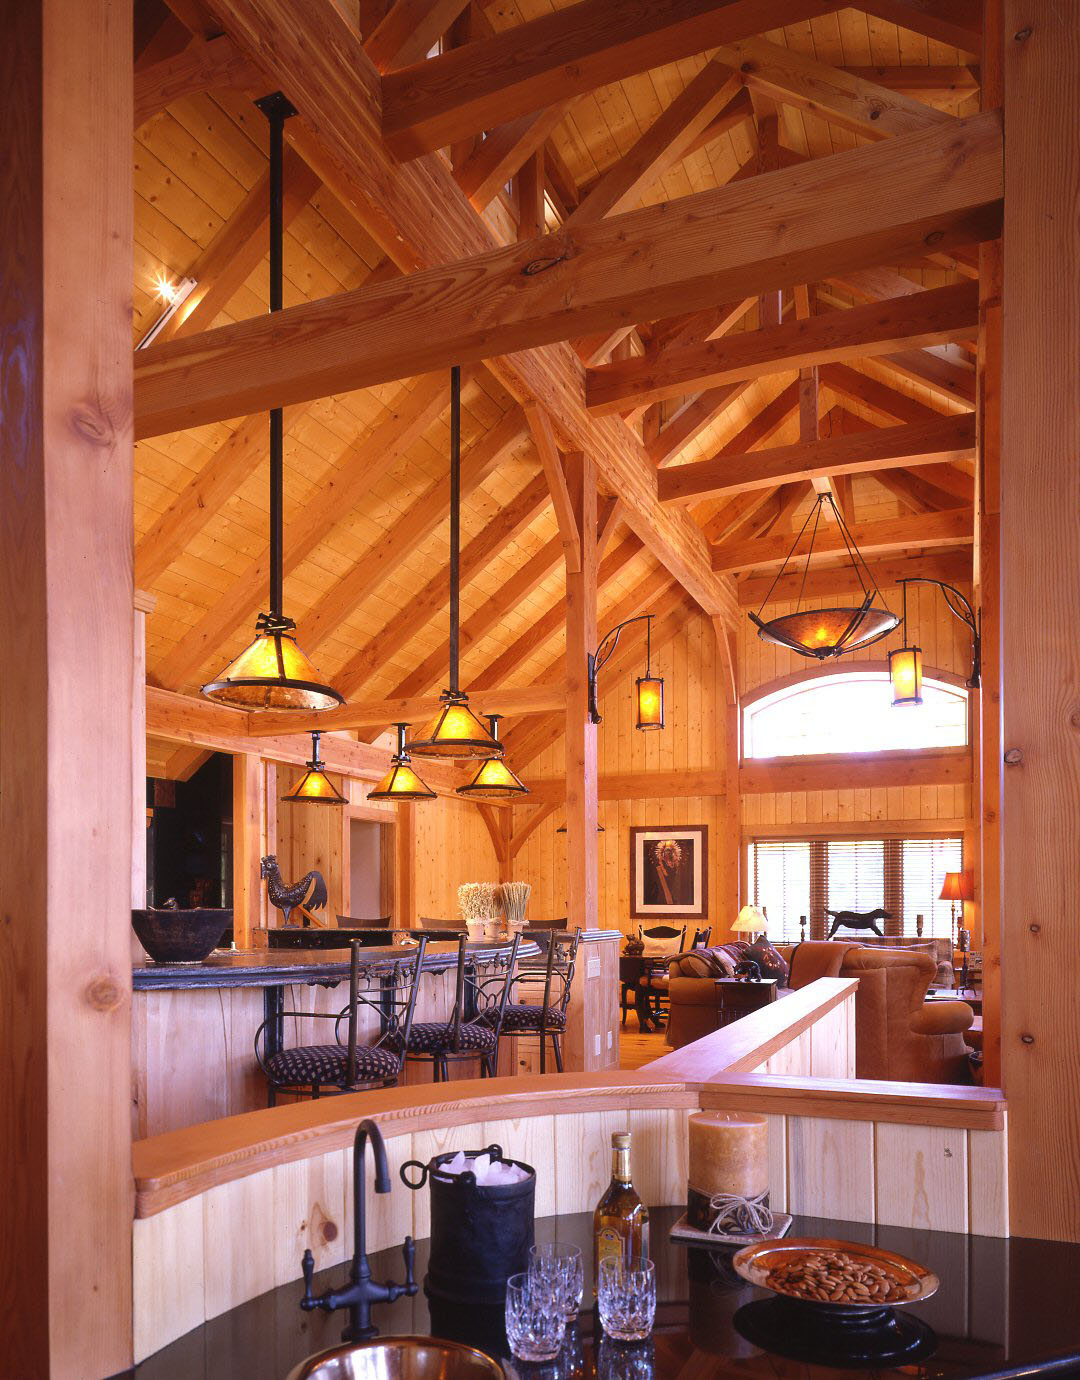 Lahontan kitchen view of timber frame ceiling